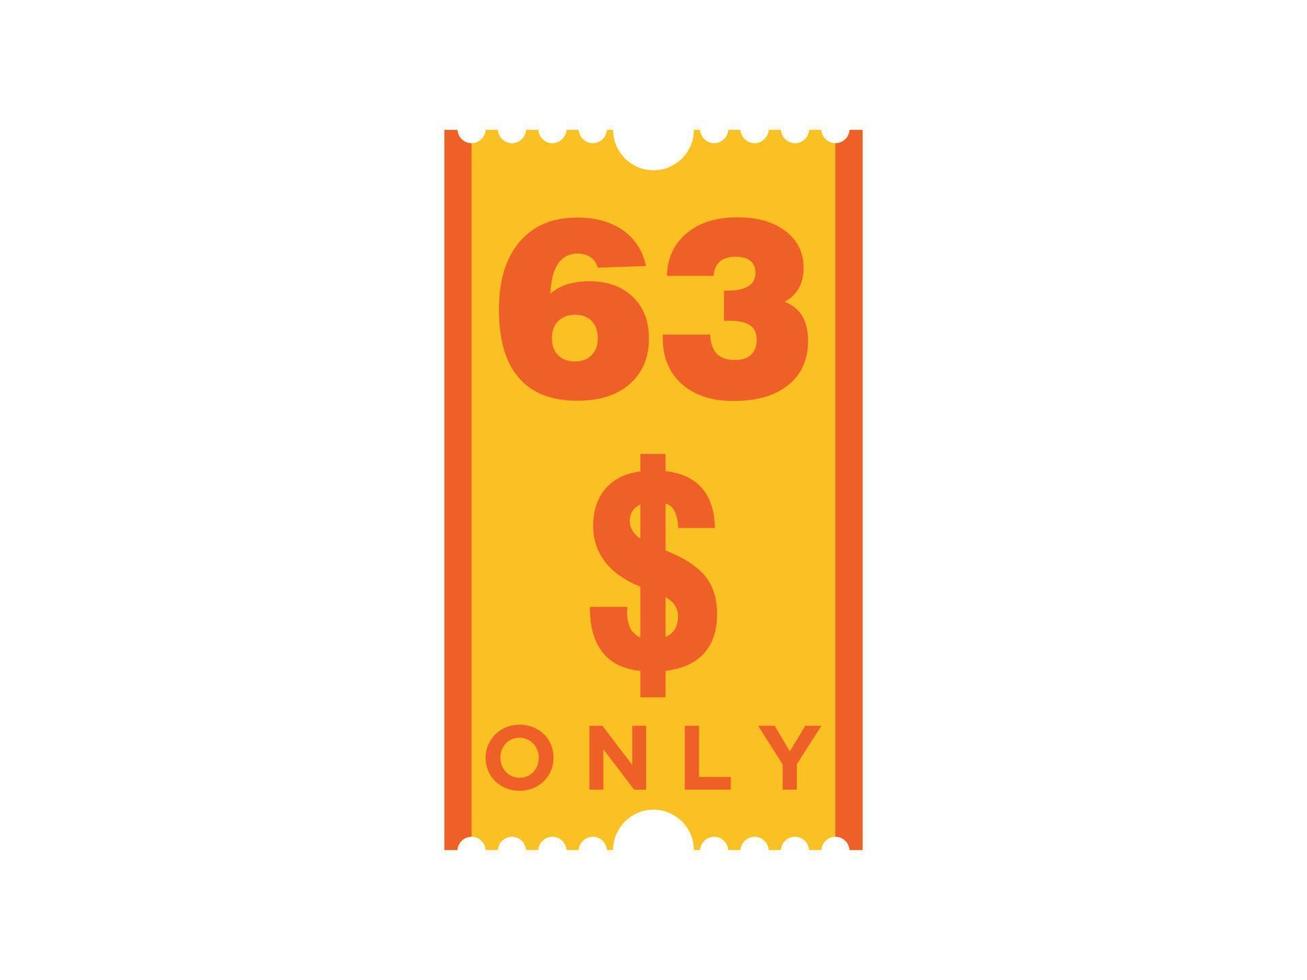 63 Dollar Only Coupon sign or Label or discount voucher Money Saving label, with coupon vector illustration summer offer ends weekend holiday